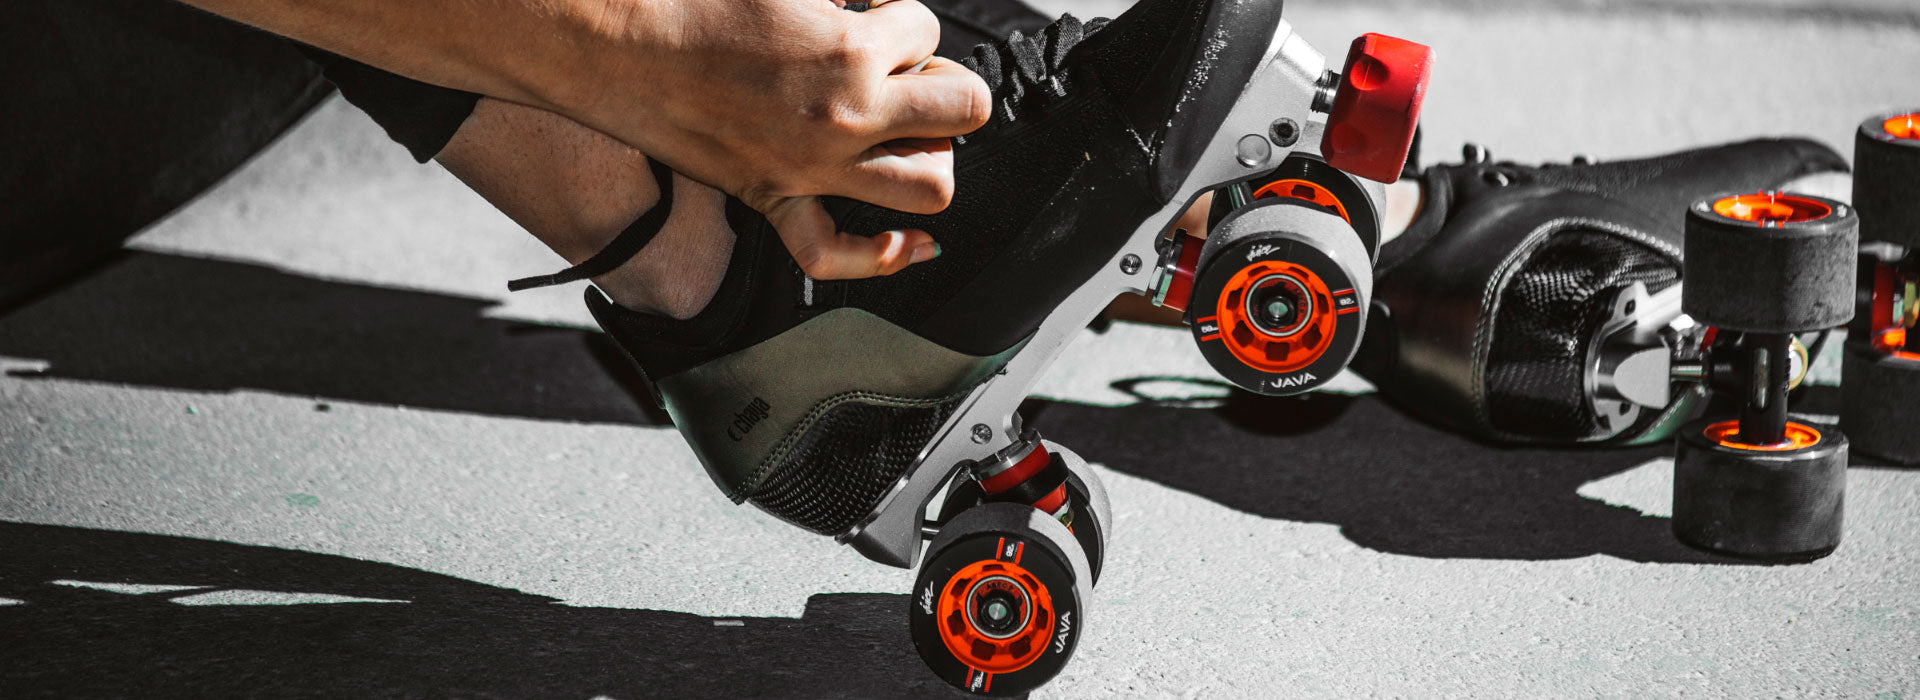 A person tying their Chaya roller skates